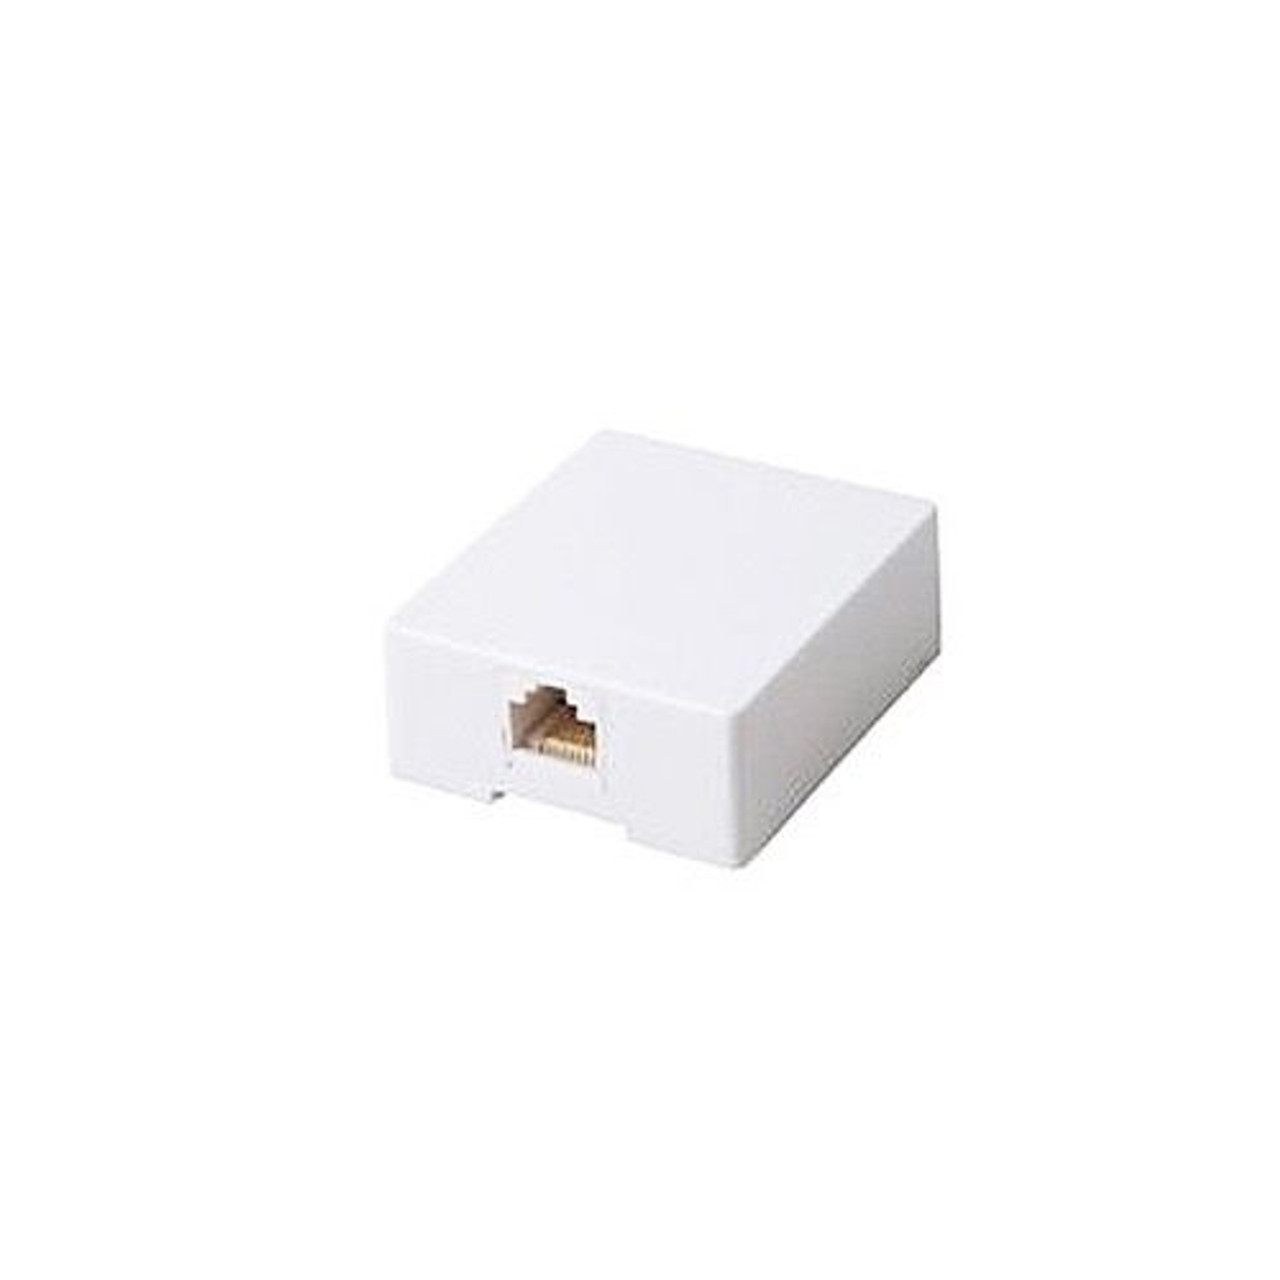 Steren 300-149WH Data Surface Mount Jack  8 Conductor White Modular Block UL Gold Contacts 8P8C 1-Port RJ45 One Port Data Block Phone Line Cable Connect Wall Box Plug